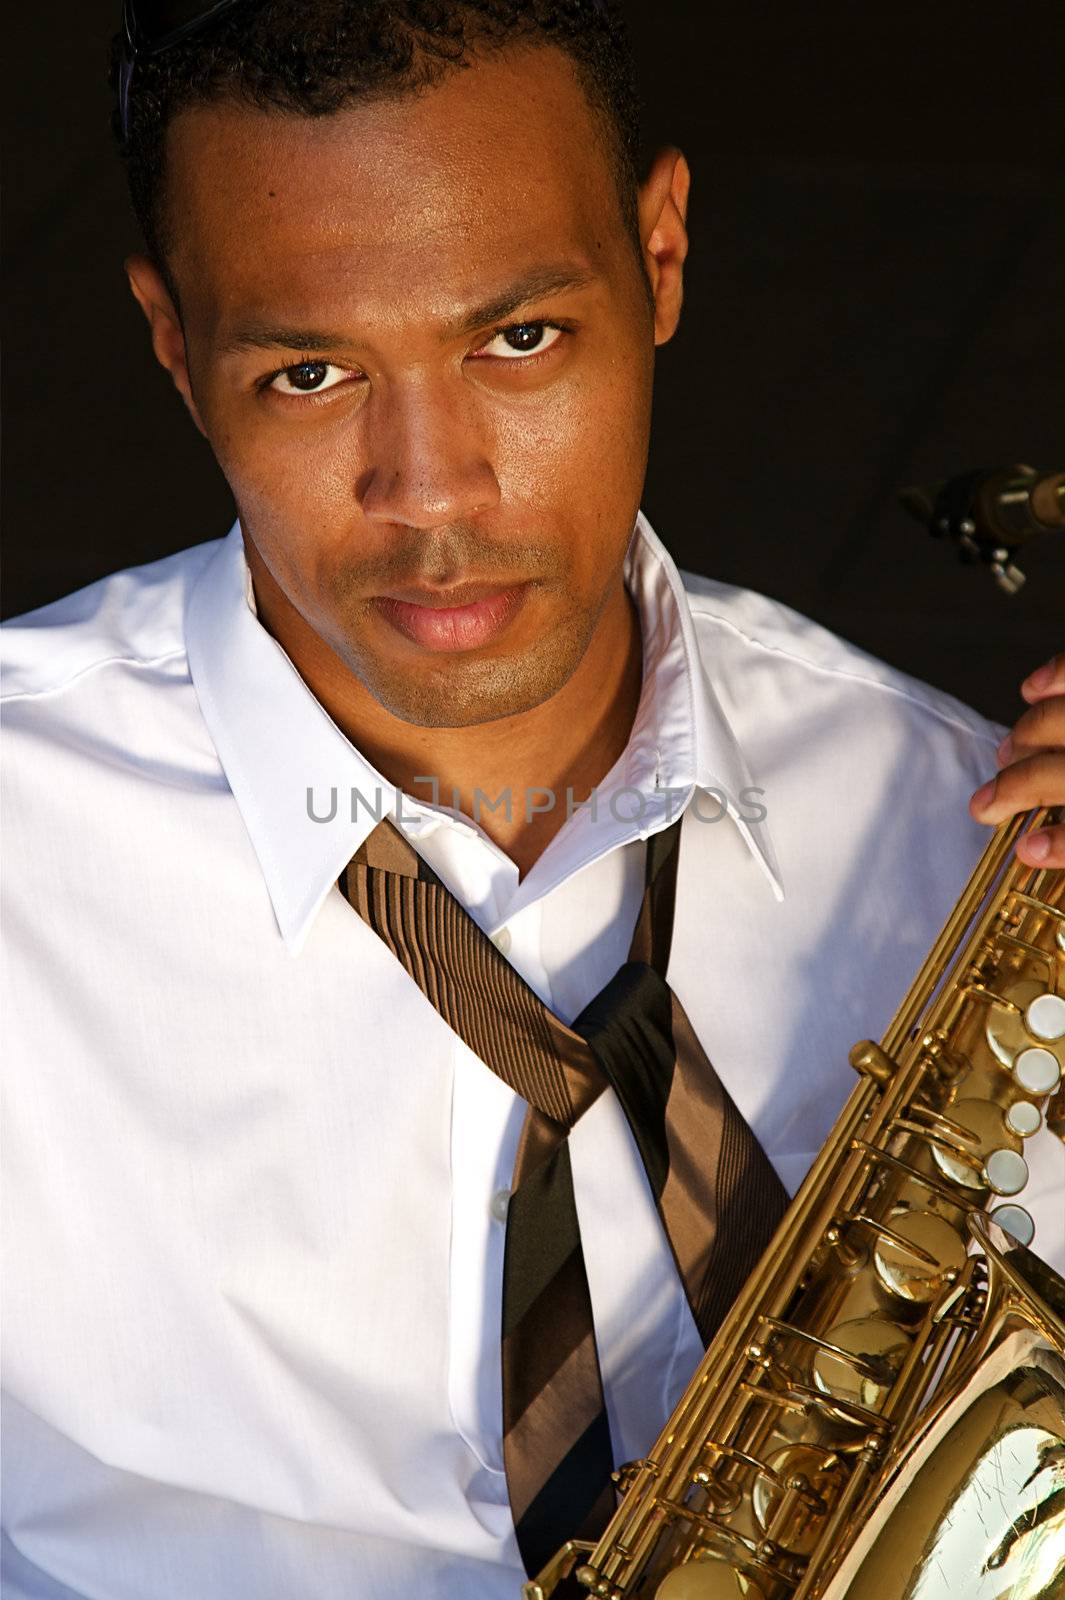 An youung and trendy African-American sax musician